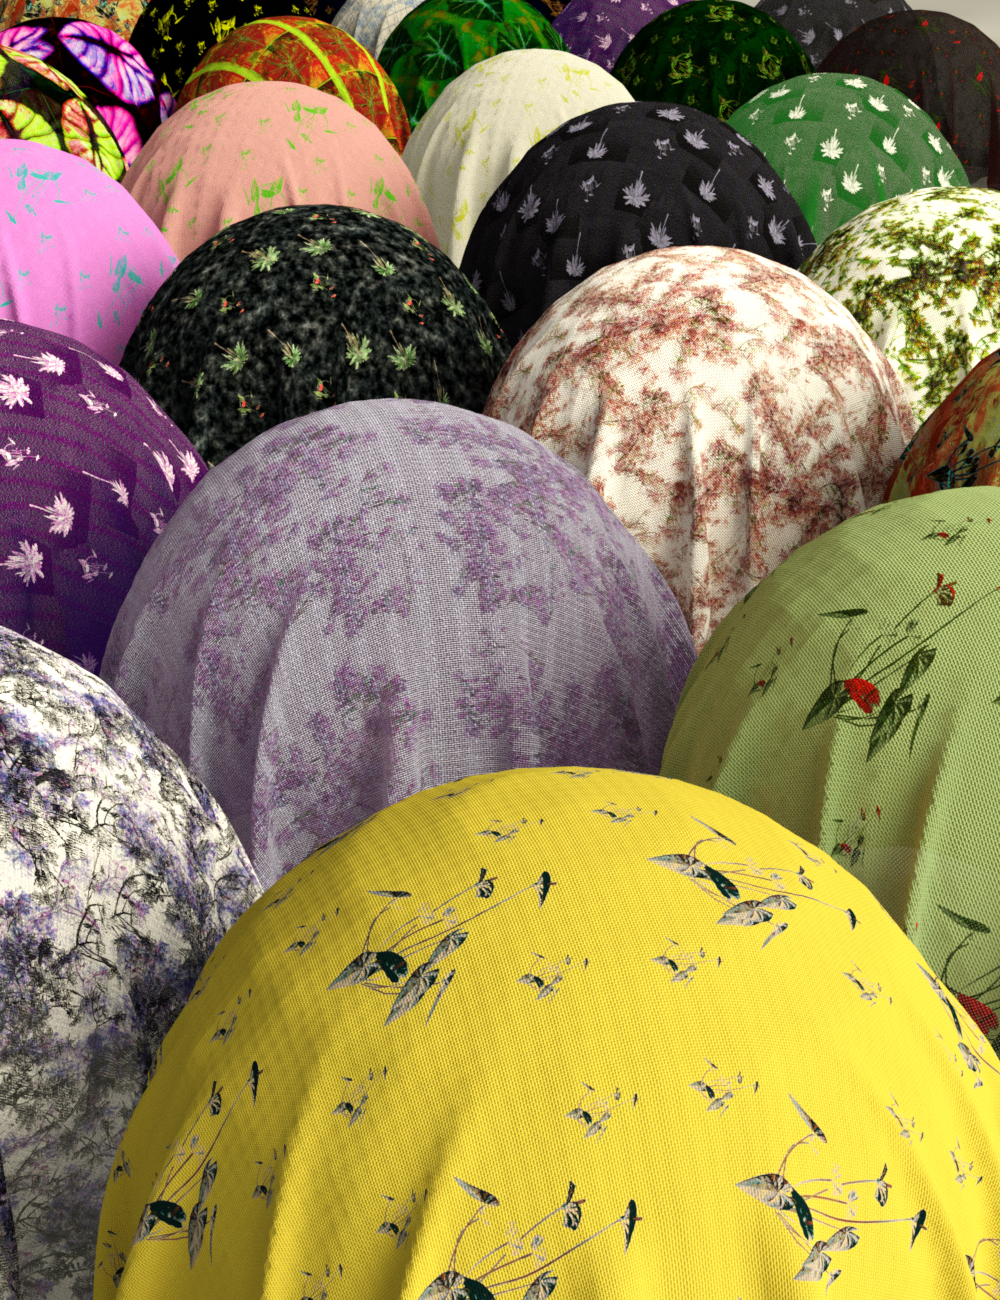 Botanical Prints - Exotic Printed Fabric Shaders for Iray by: MartinJFrost, 3D Models by Daz 3D